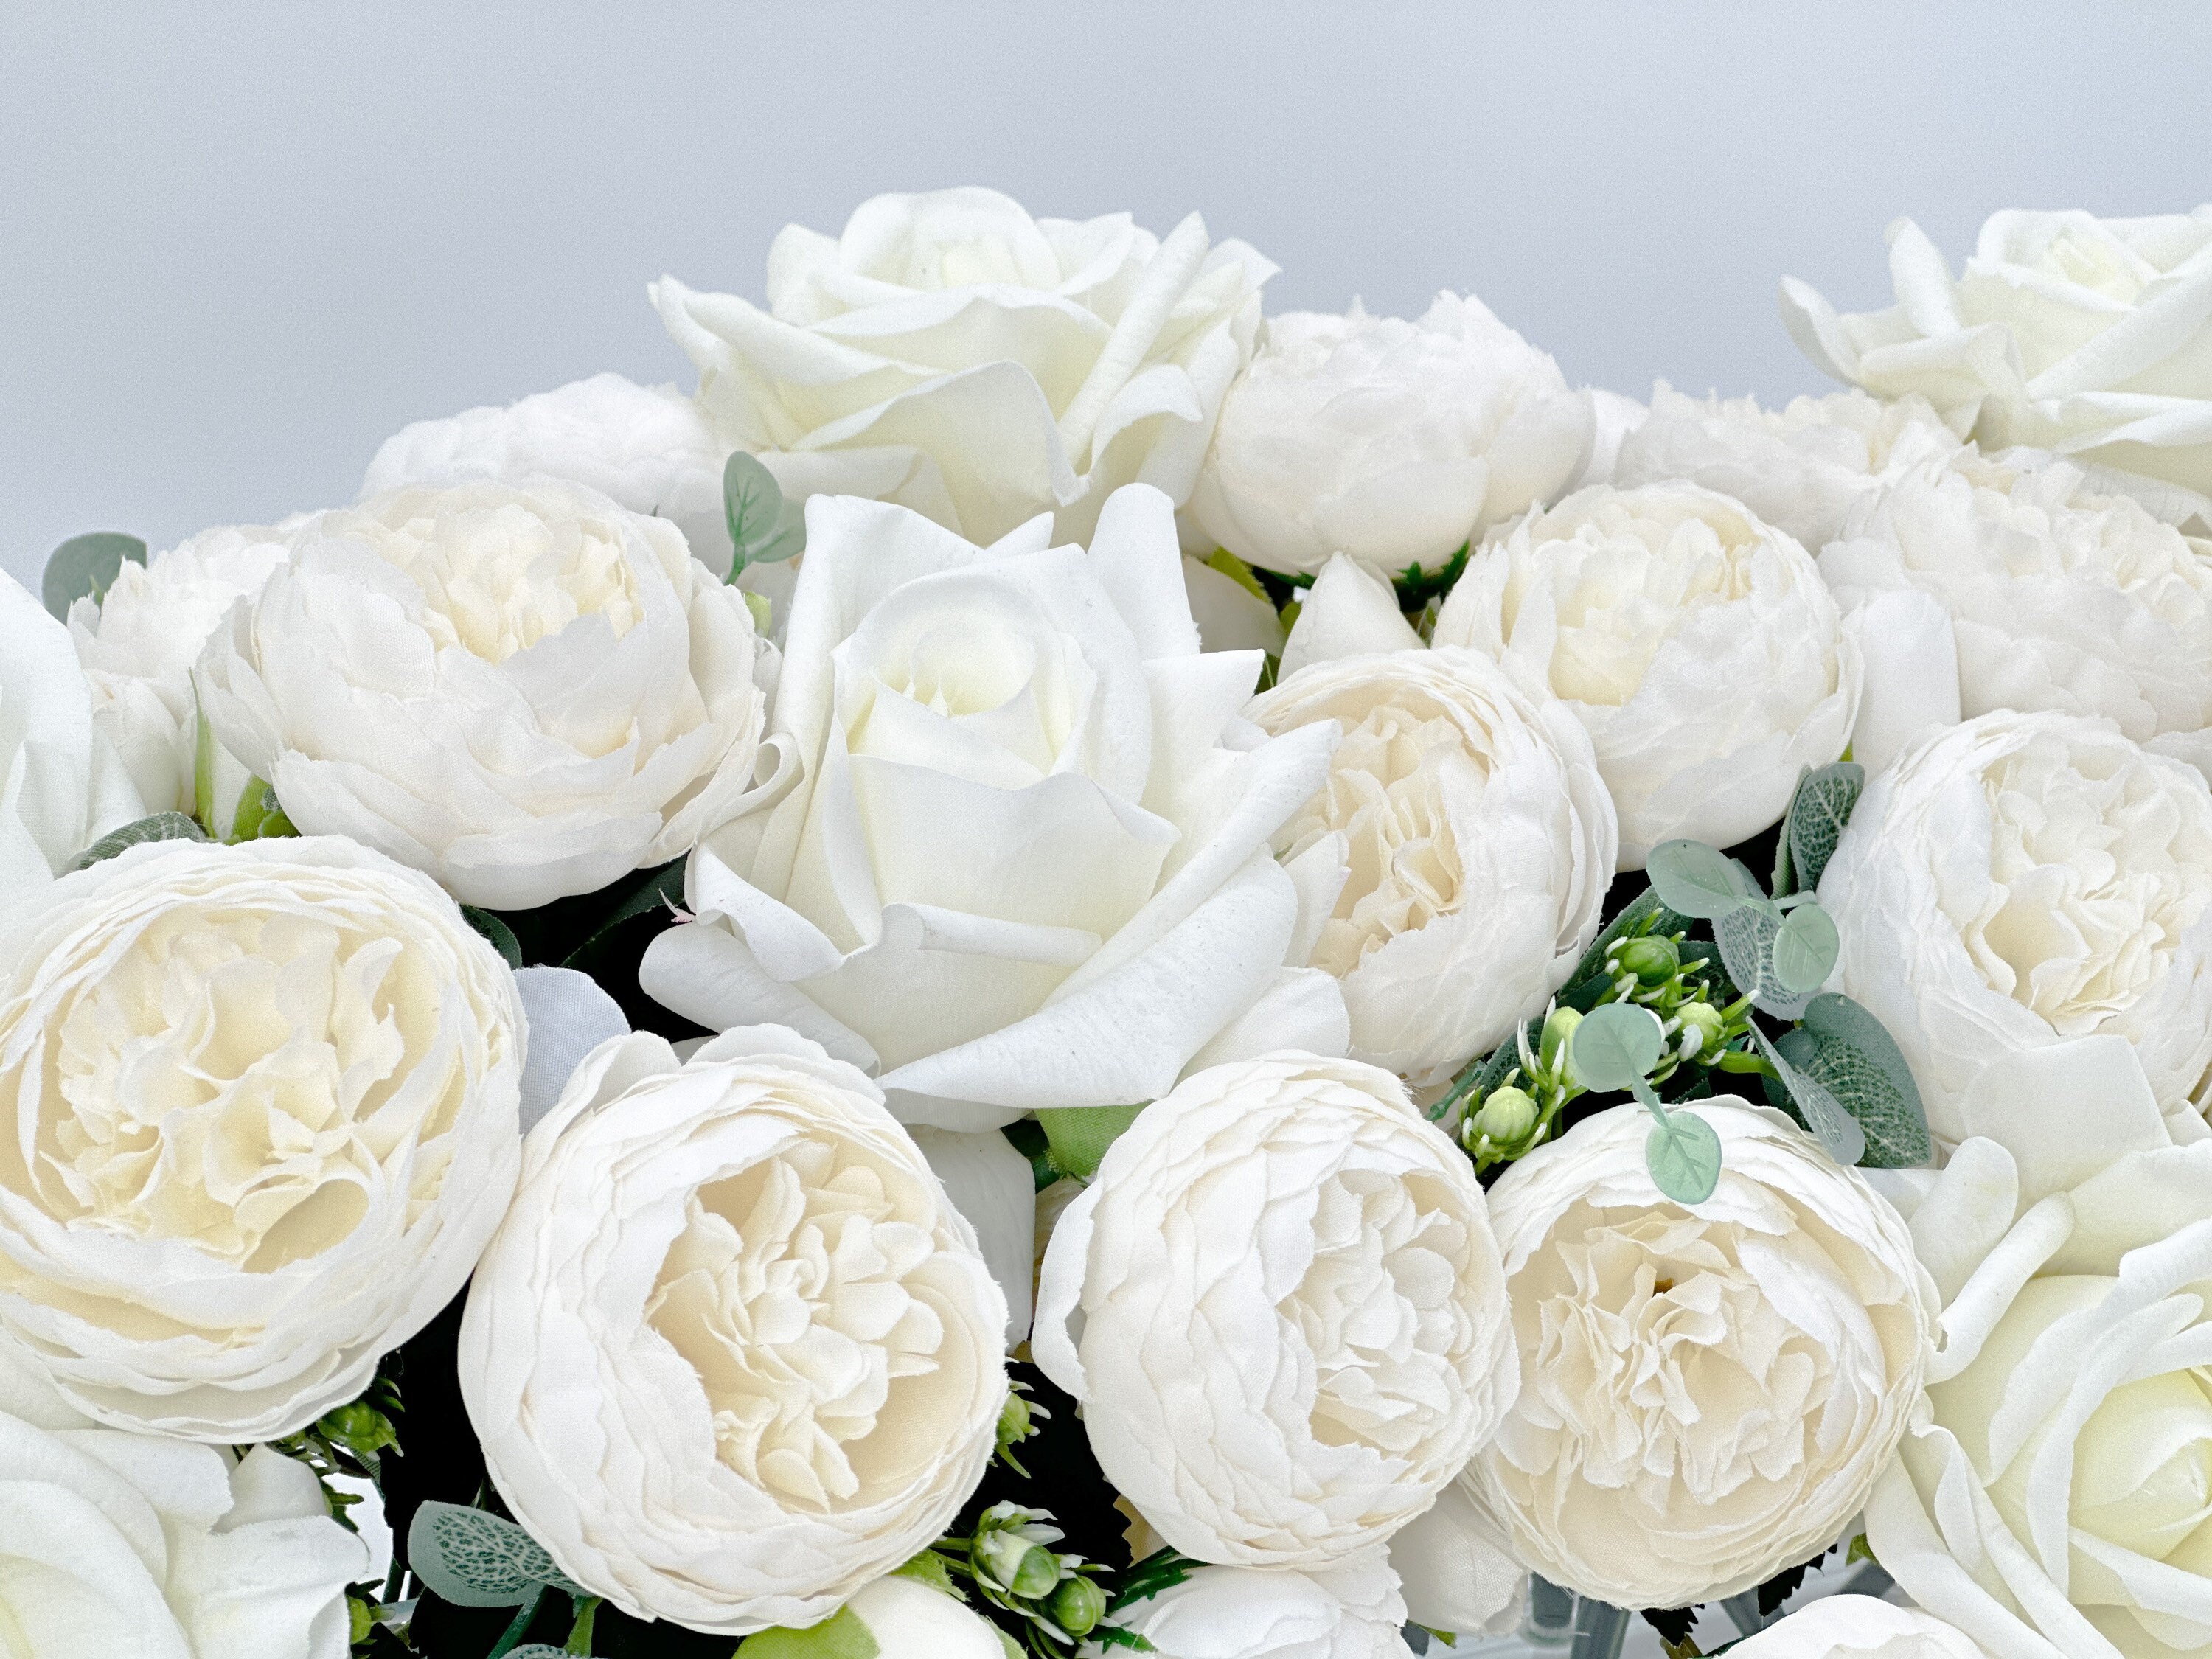 60cm Artificial Winter Rose White Long Branch For Wedding And Home